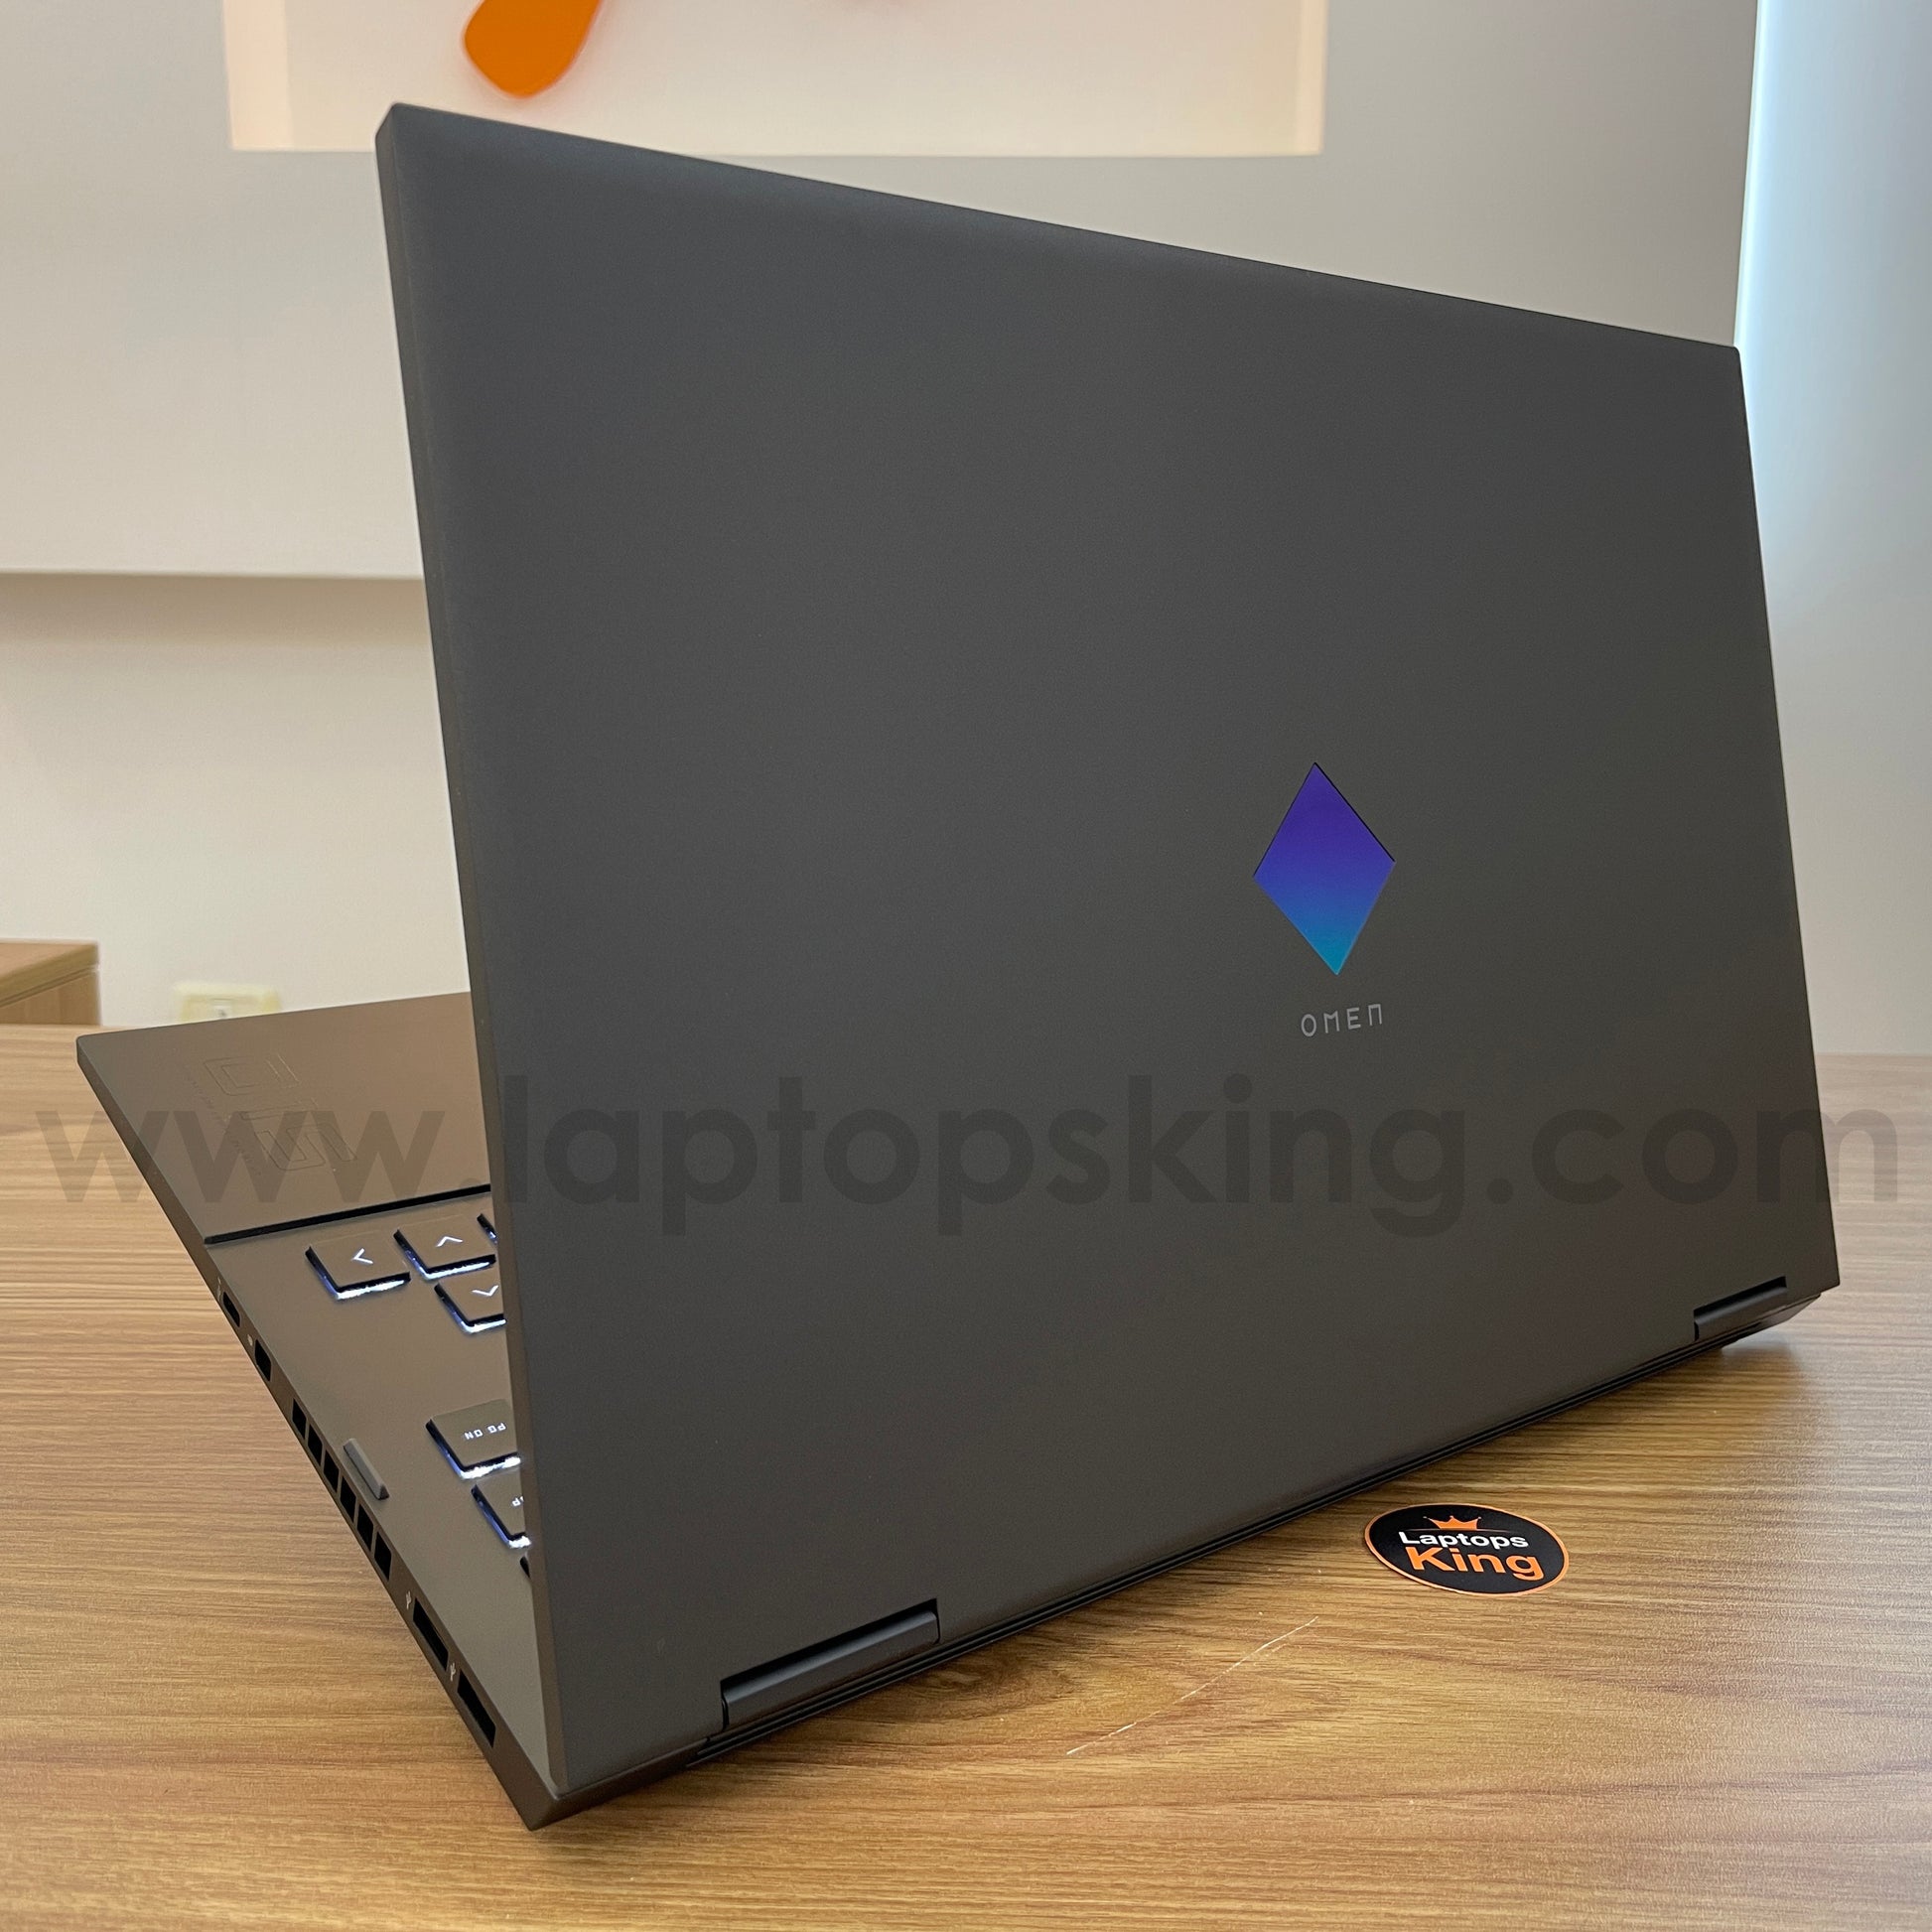 HP Omen 15-EN1 Ryzen 9 5900HX RTX 3070 Gaming Laptop Offers (Brand New) Gaming laptop, Graphic Design laptop, best laptop for gaming, best laptop for graphic design, computer for sale Lebanon, laptop for video editing in Lebanon, laptop for sale Lebanon, best graphic design laptop,	best video editing laptop, best programming laptop, laptop for sale in Lebanon, laptops for sale in Lebanon, laptop for sale in Lebanon, buy computer Lebanon, buy laptop Lebanon.